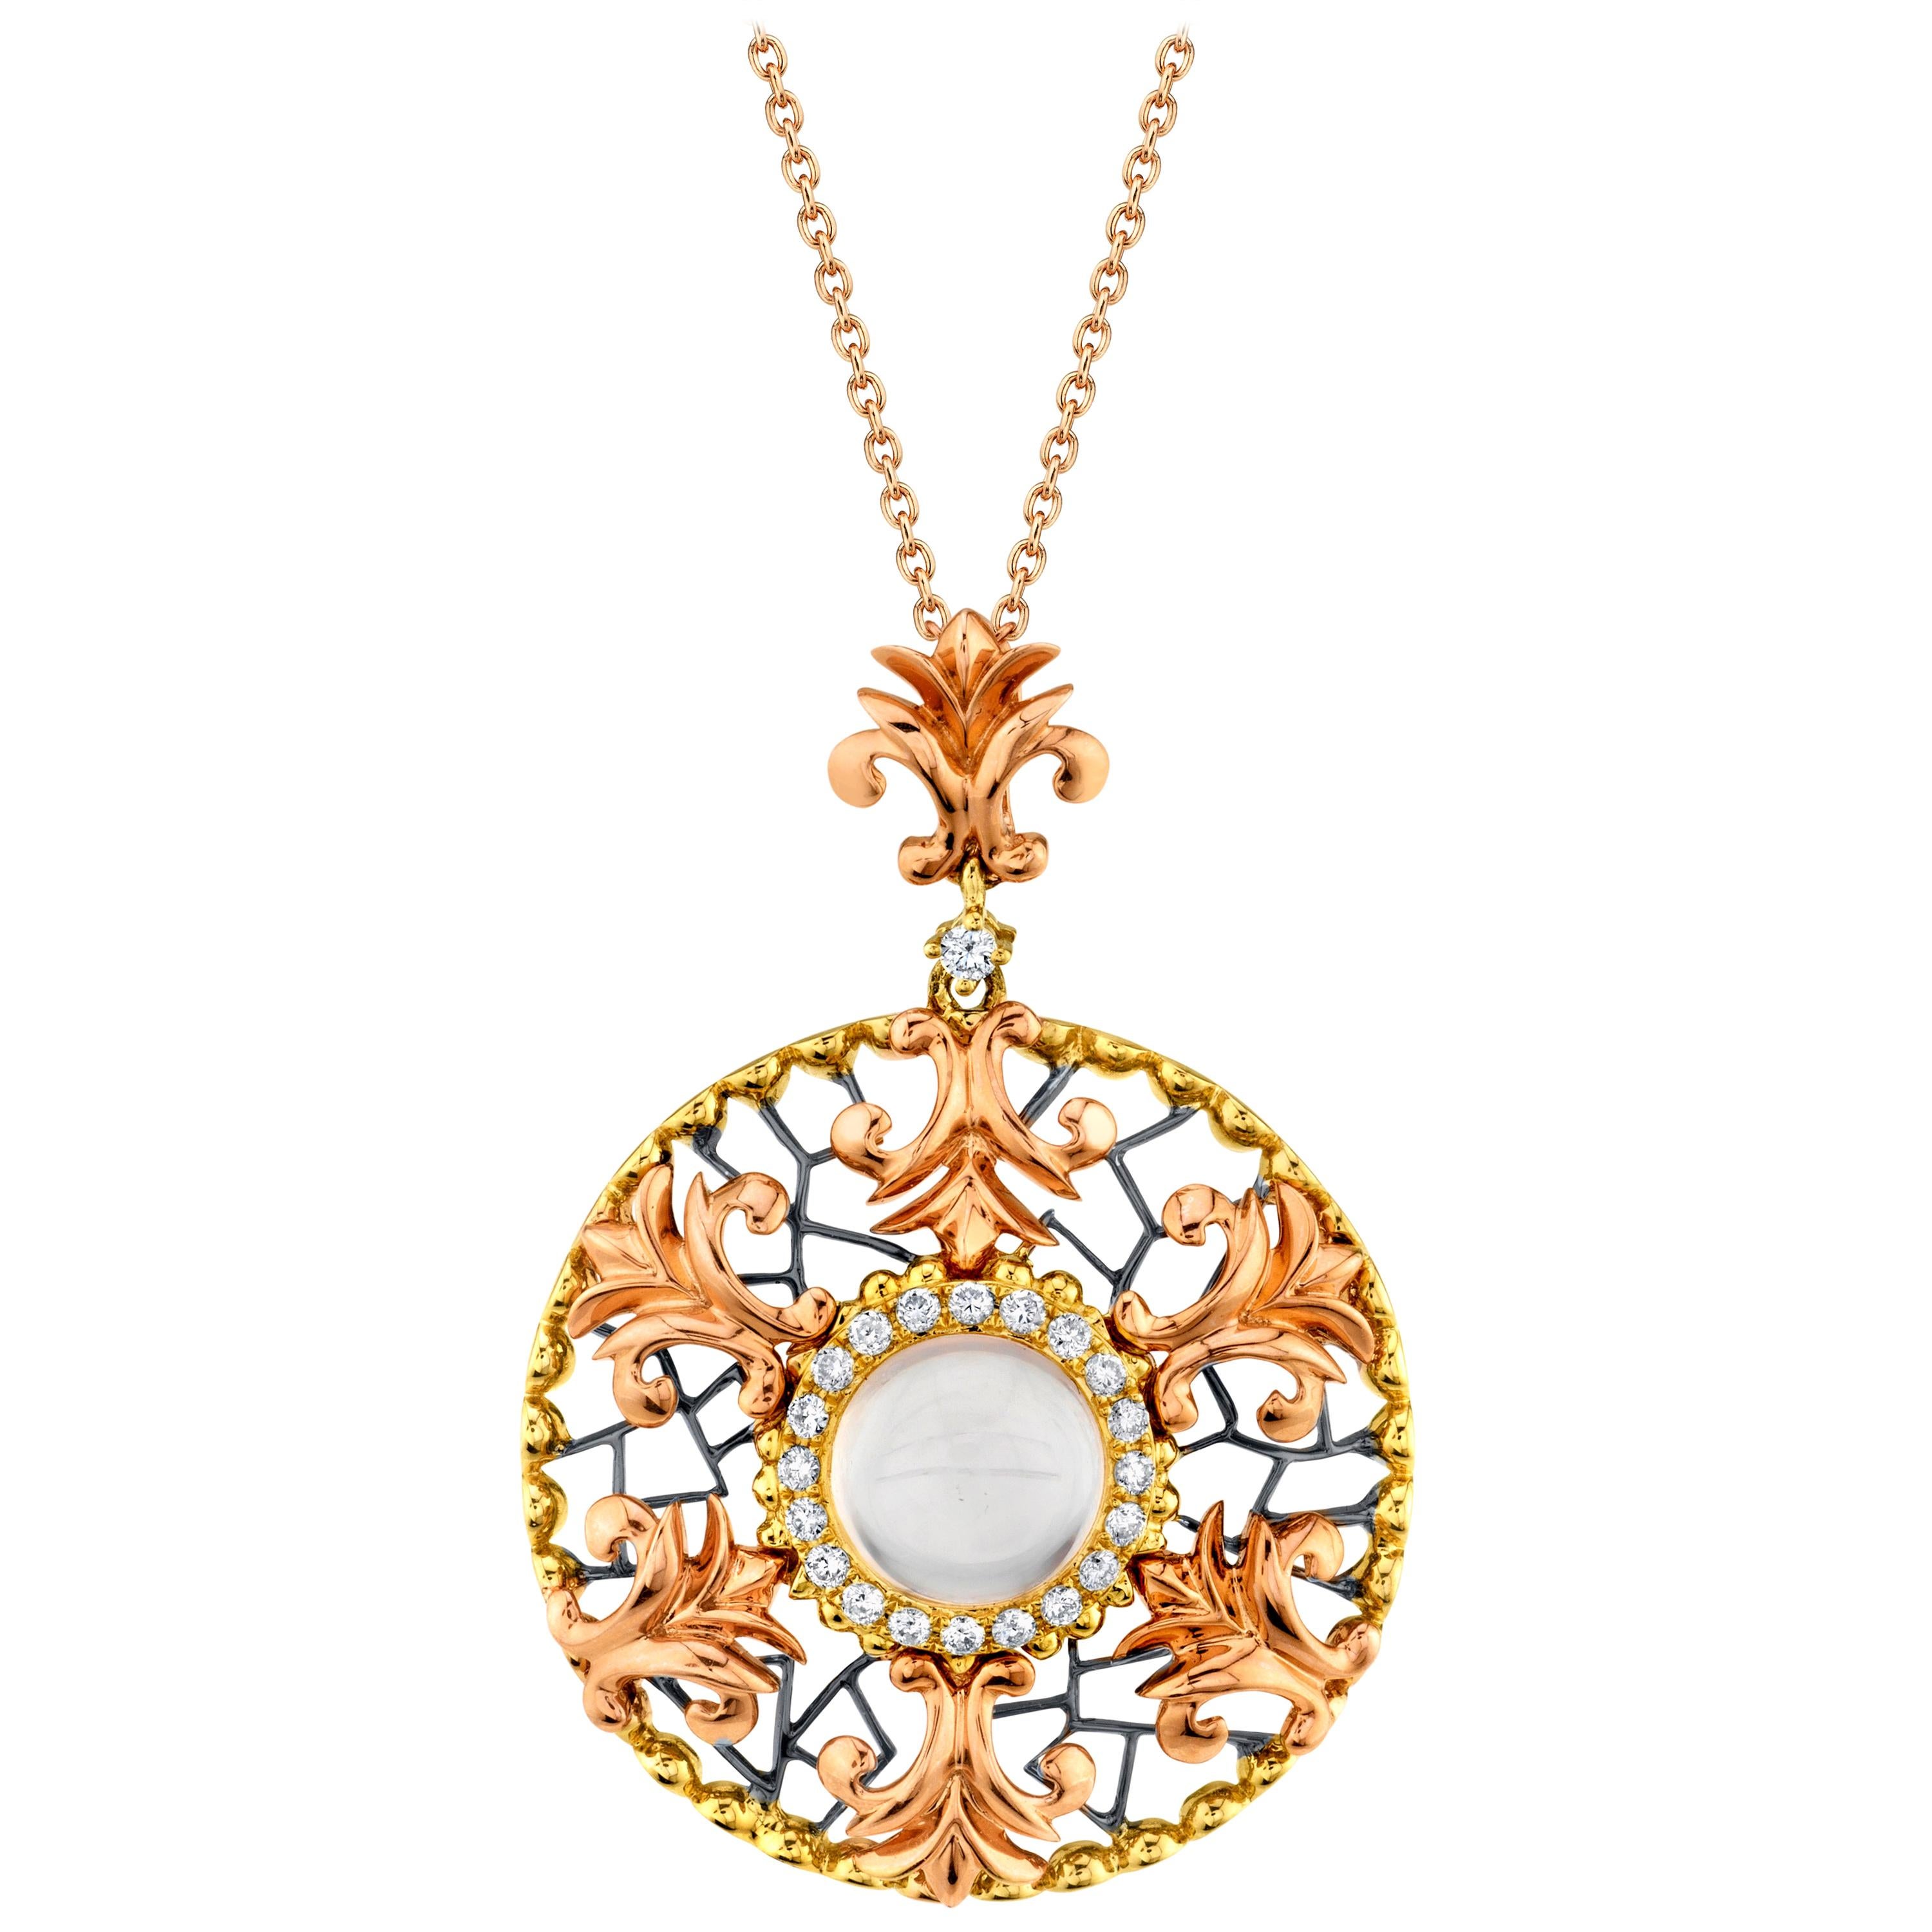 1.78 Carat Moonstone and Diamond Halo Necklace in Yellow and Rose Gold